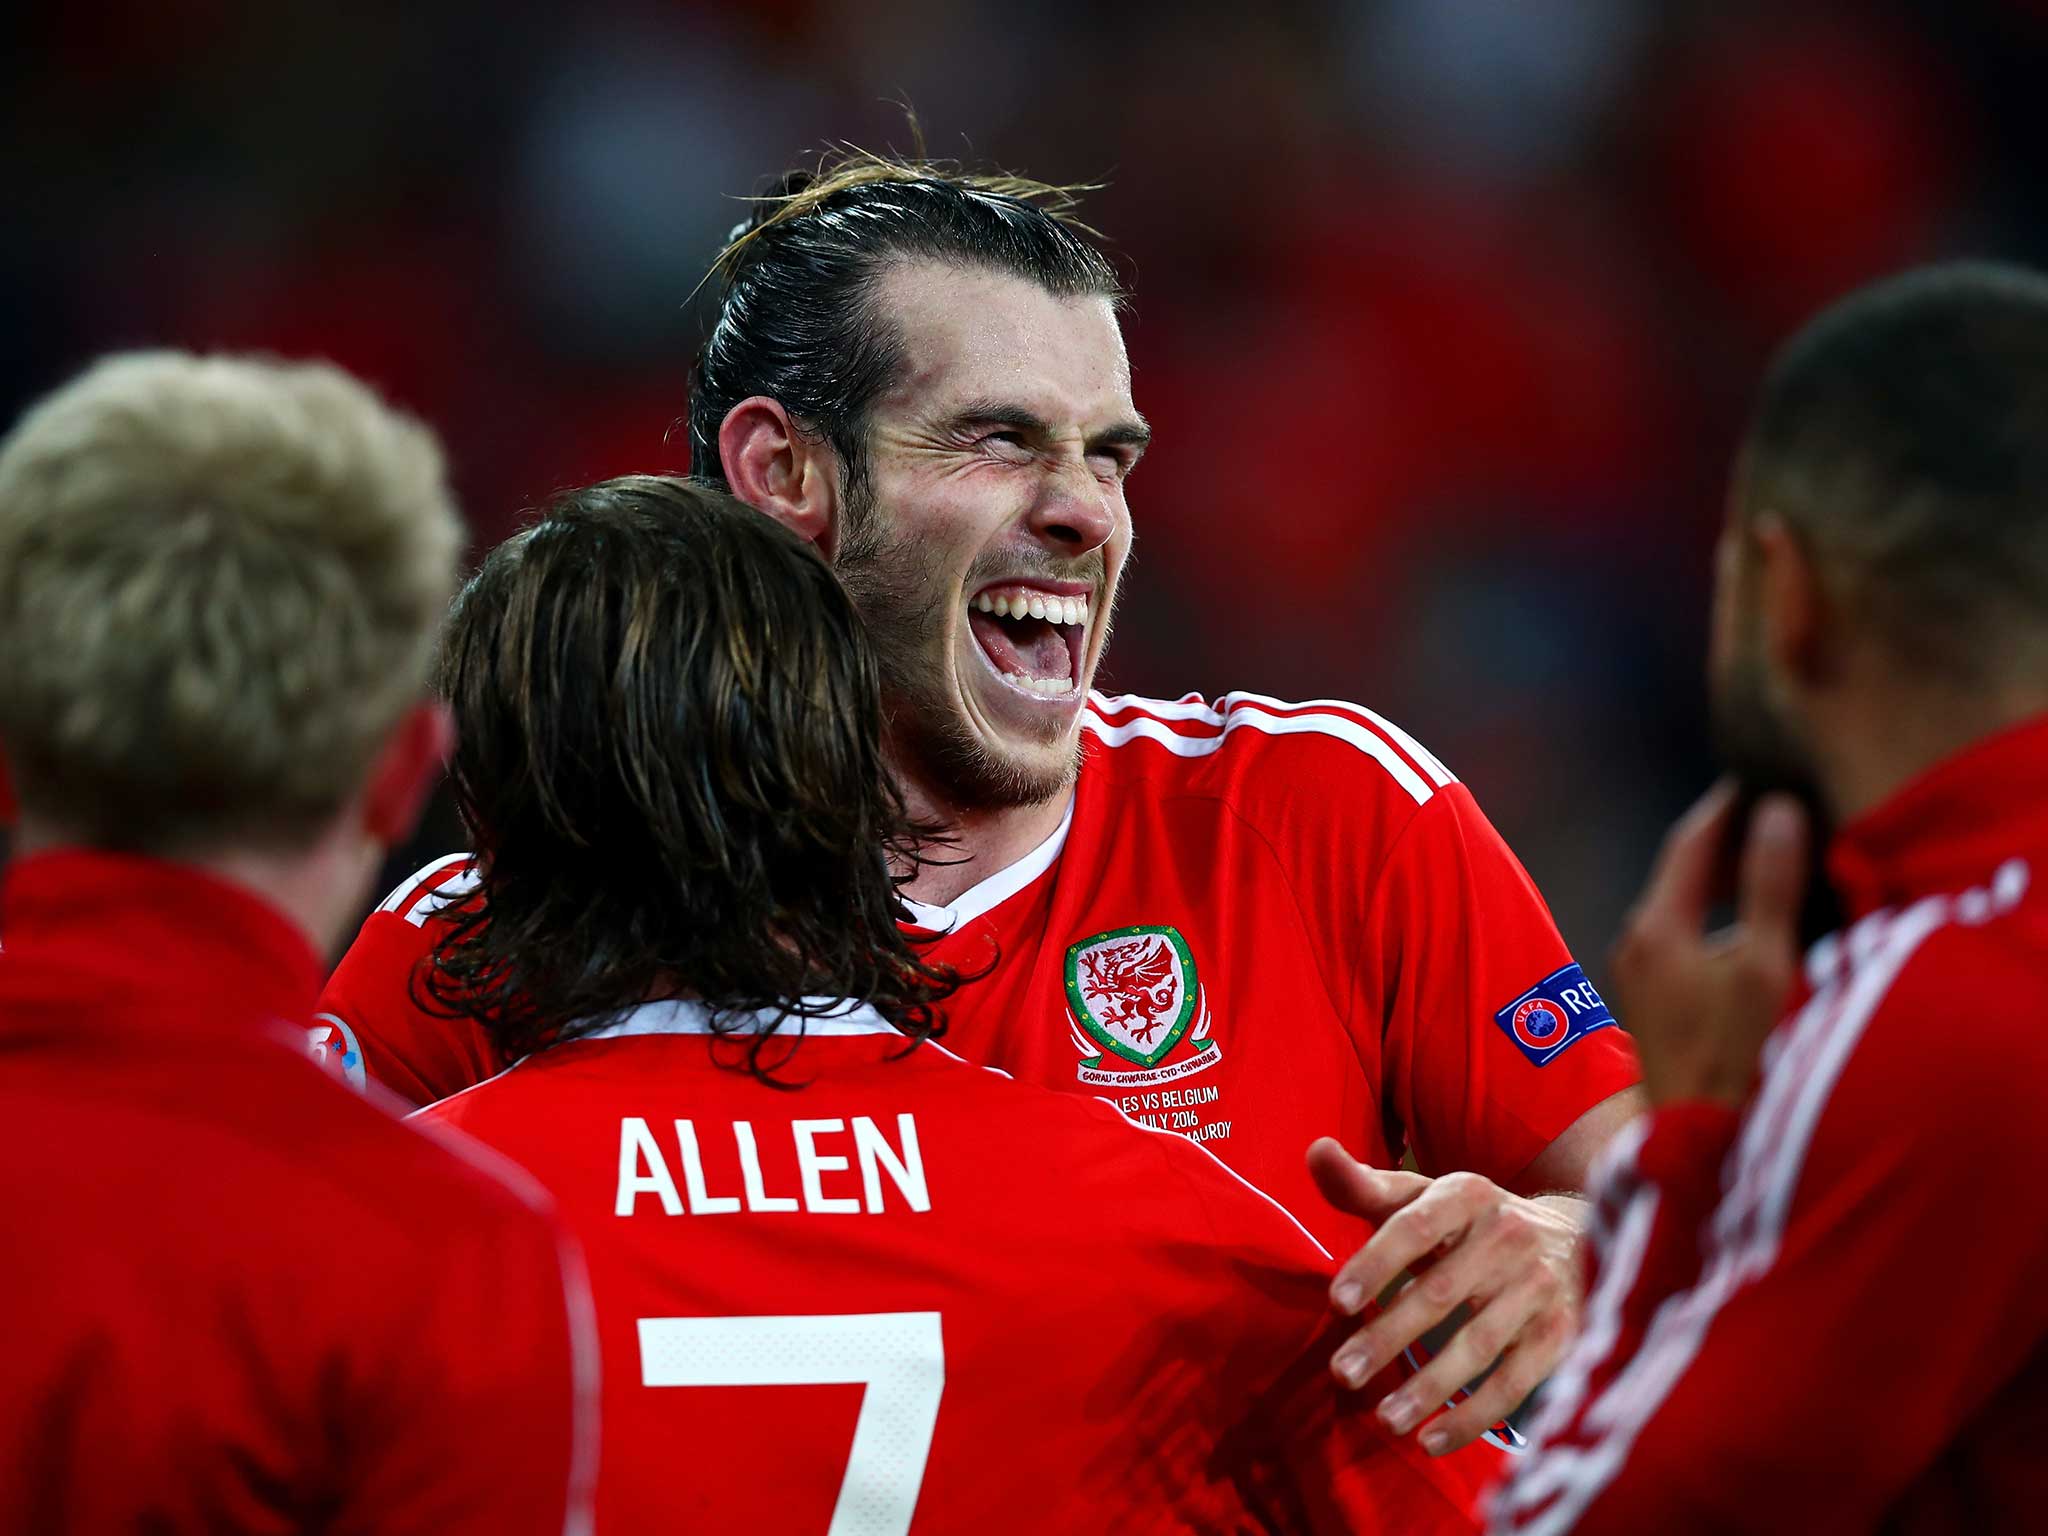 Gareth Bale led from the front as Wales upset the odds to make the last four at Euro 2016 (Getty)